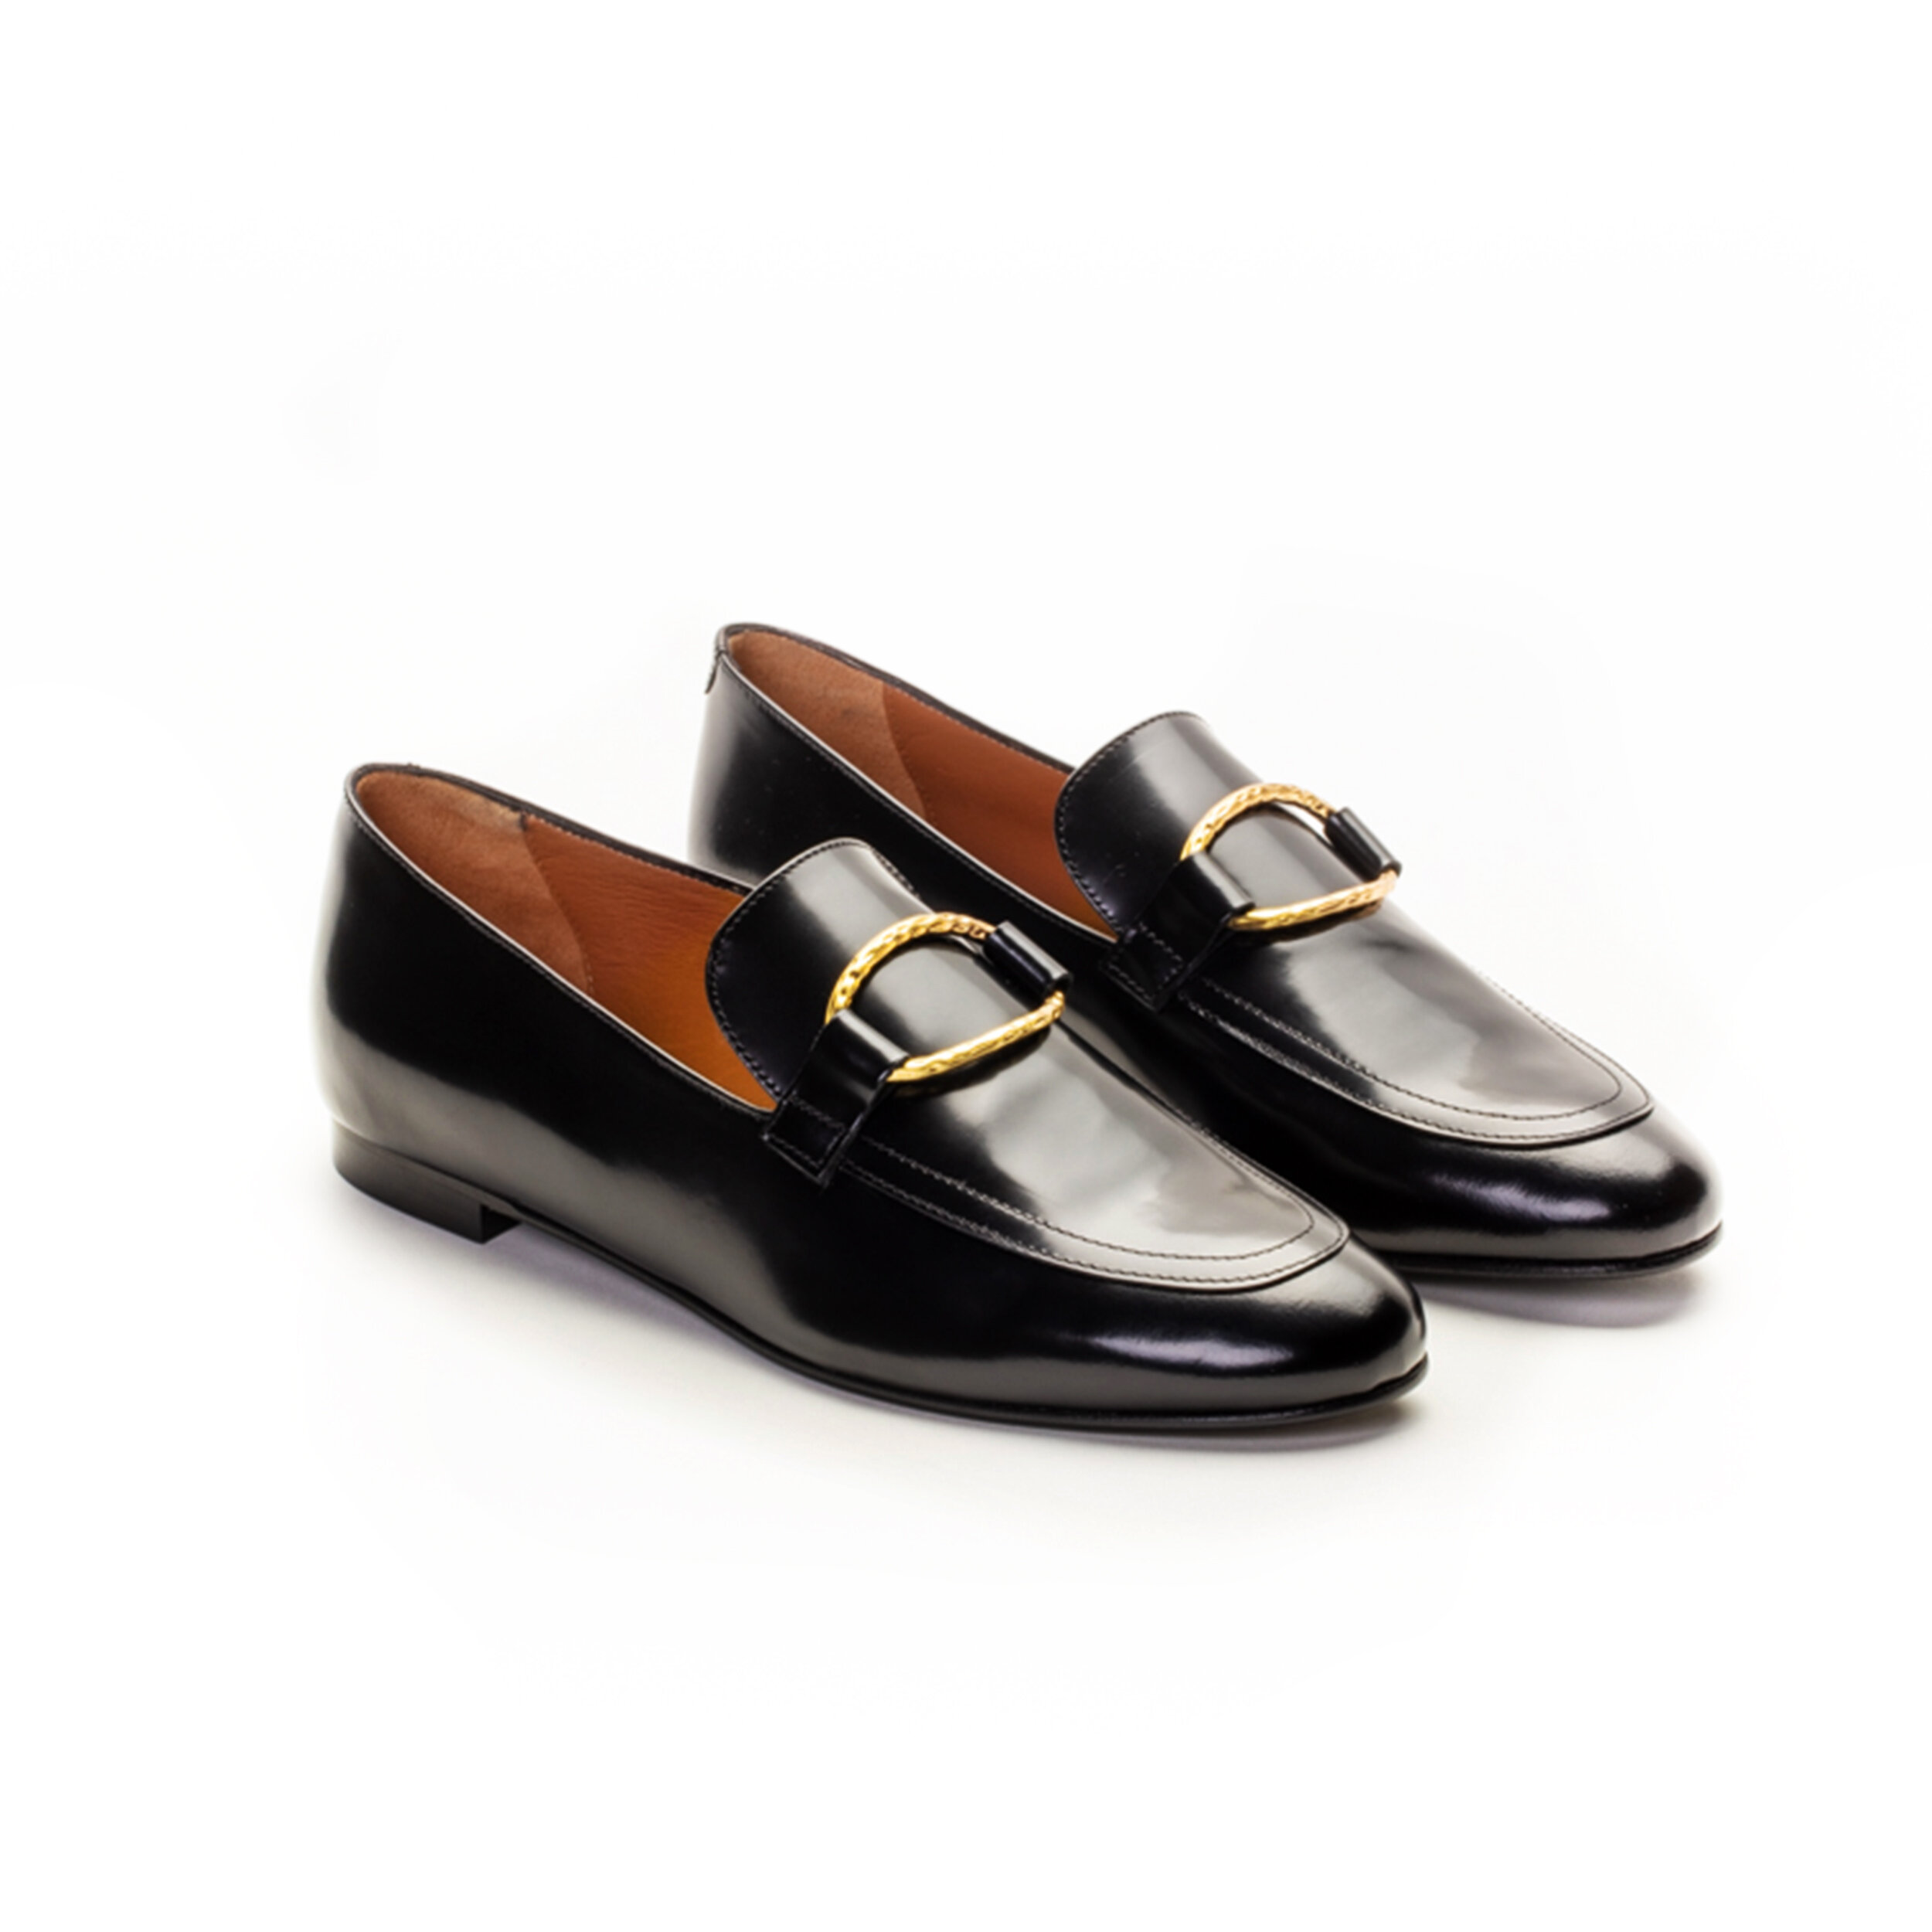 Black Tomboy Chic Loafers_229€